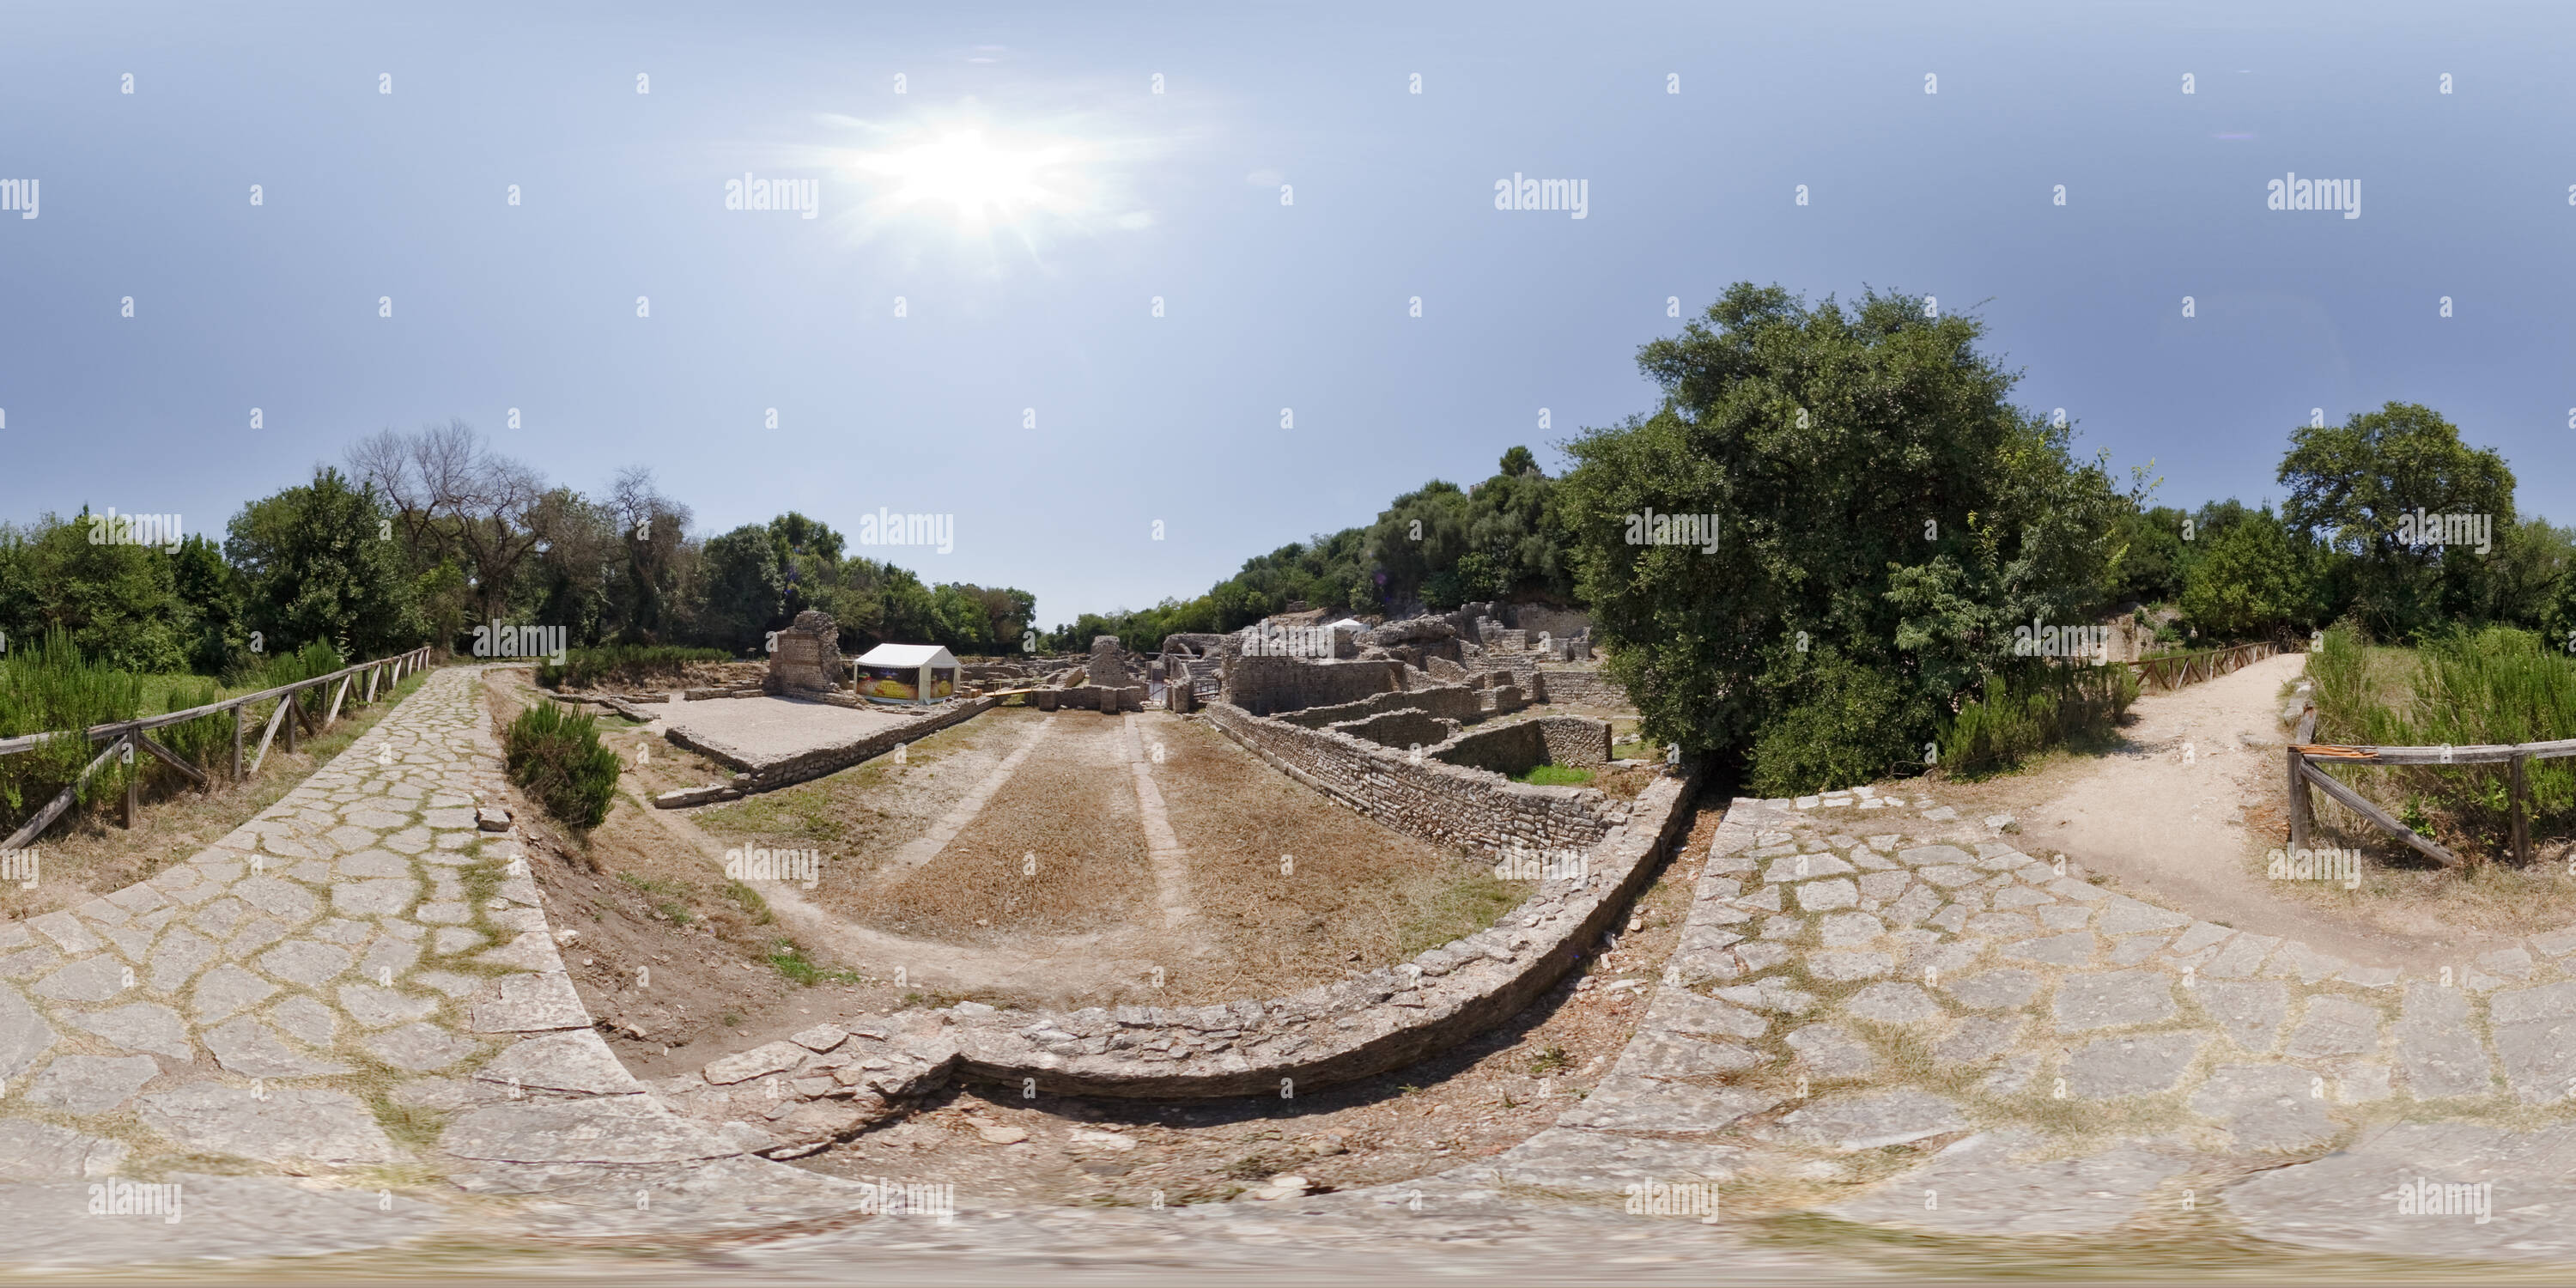 360 degree panoramic view of archeological site Butrint/ Albania